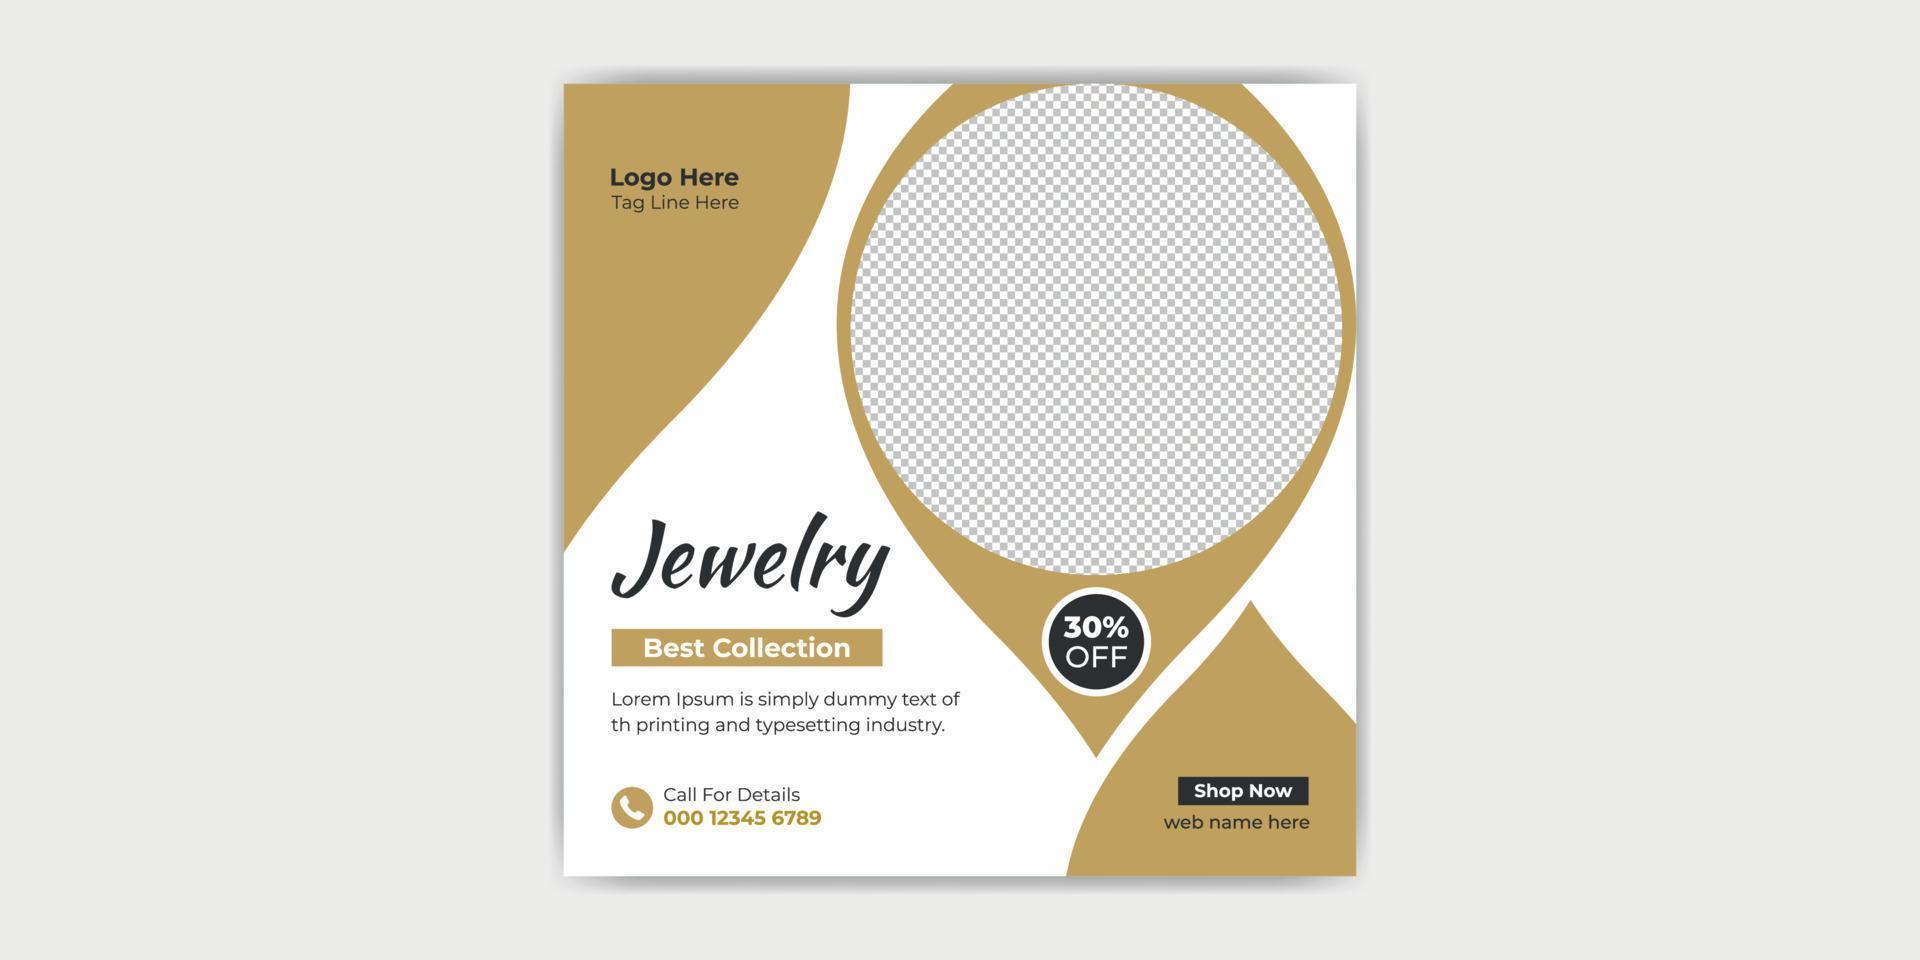 Jewellery Collection Web Banner or Social Media Post vector